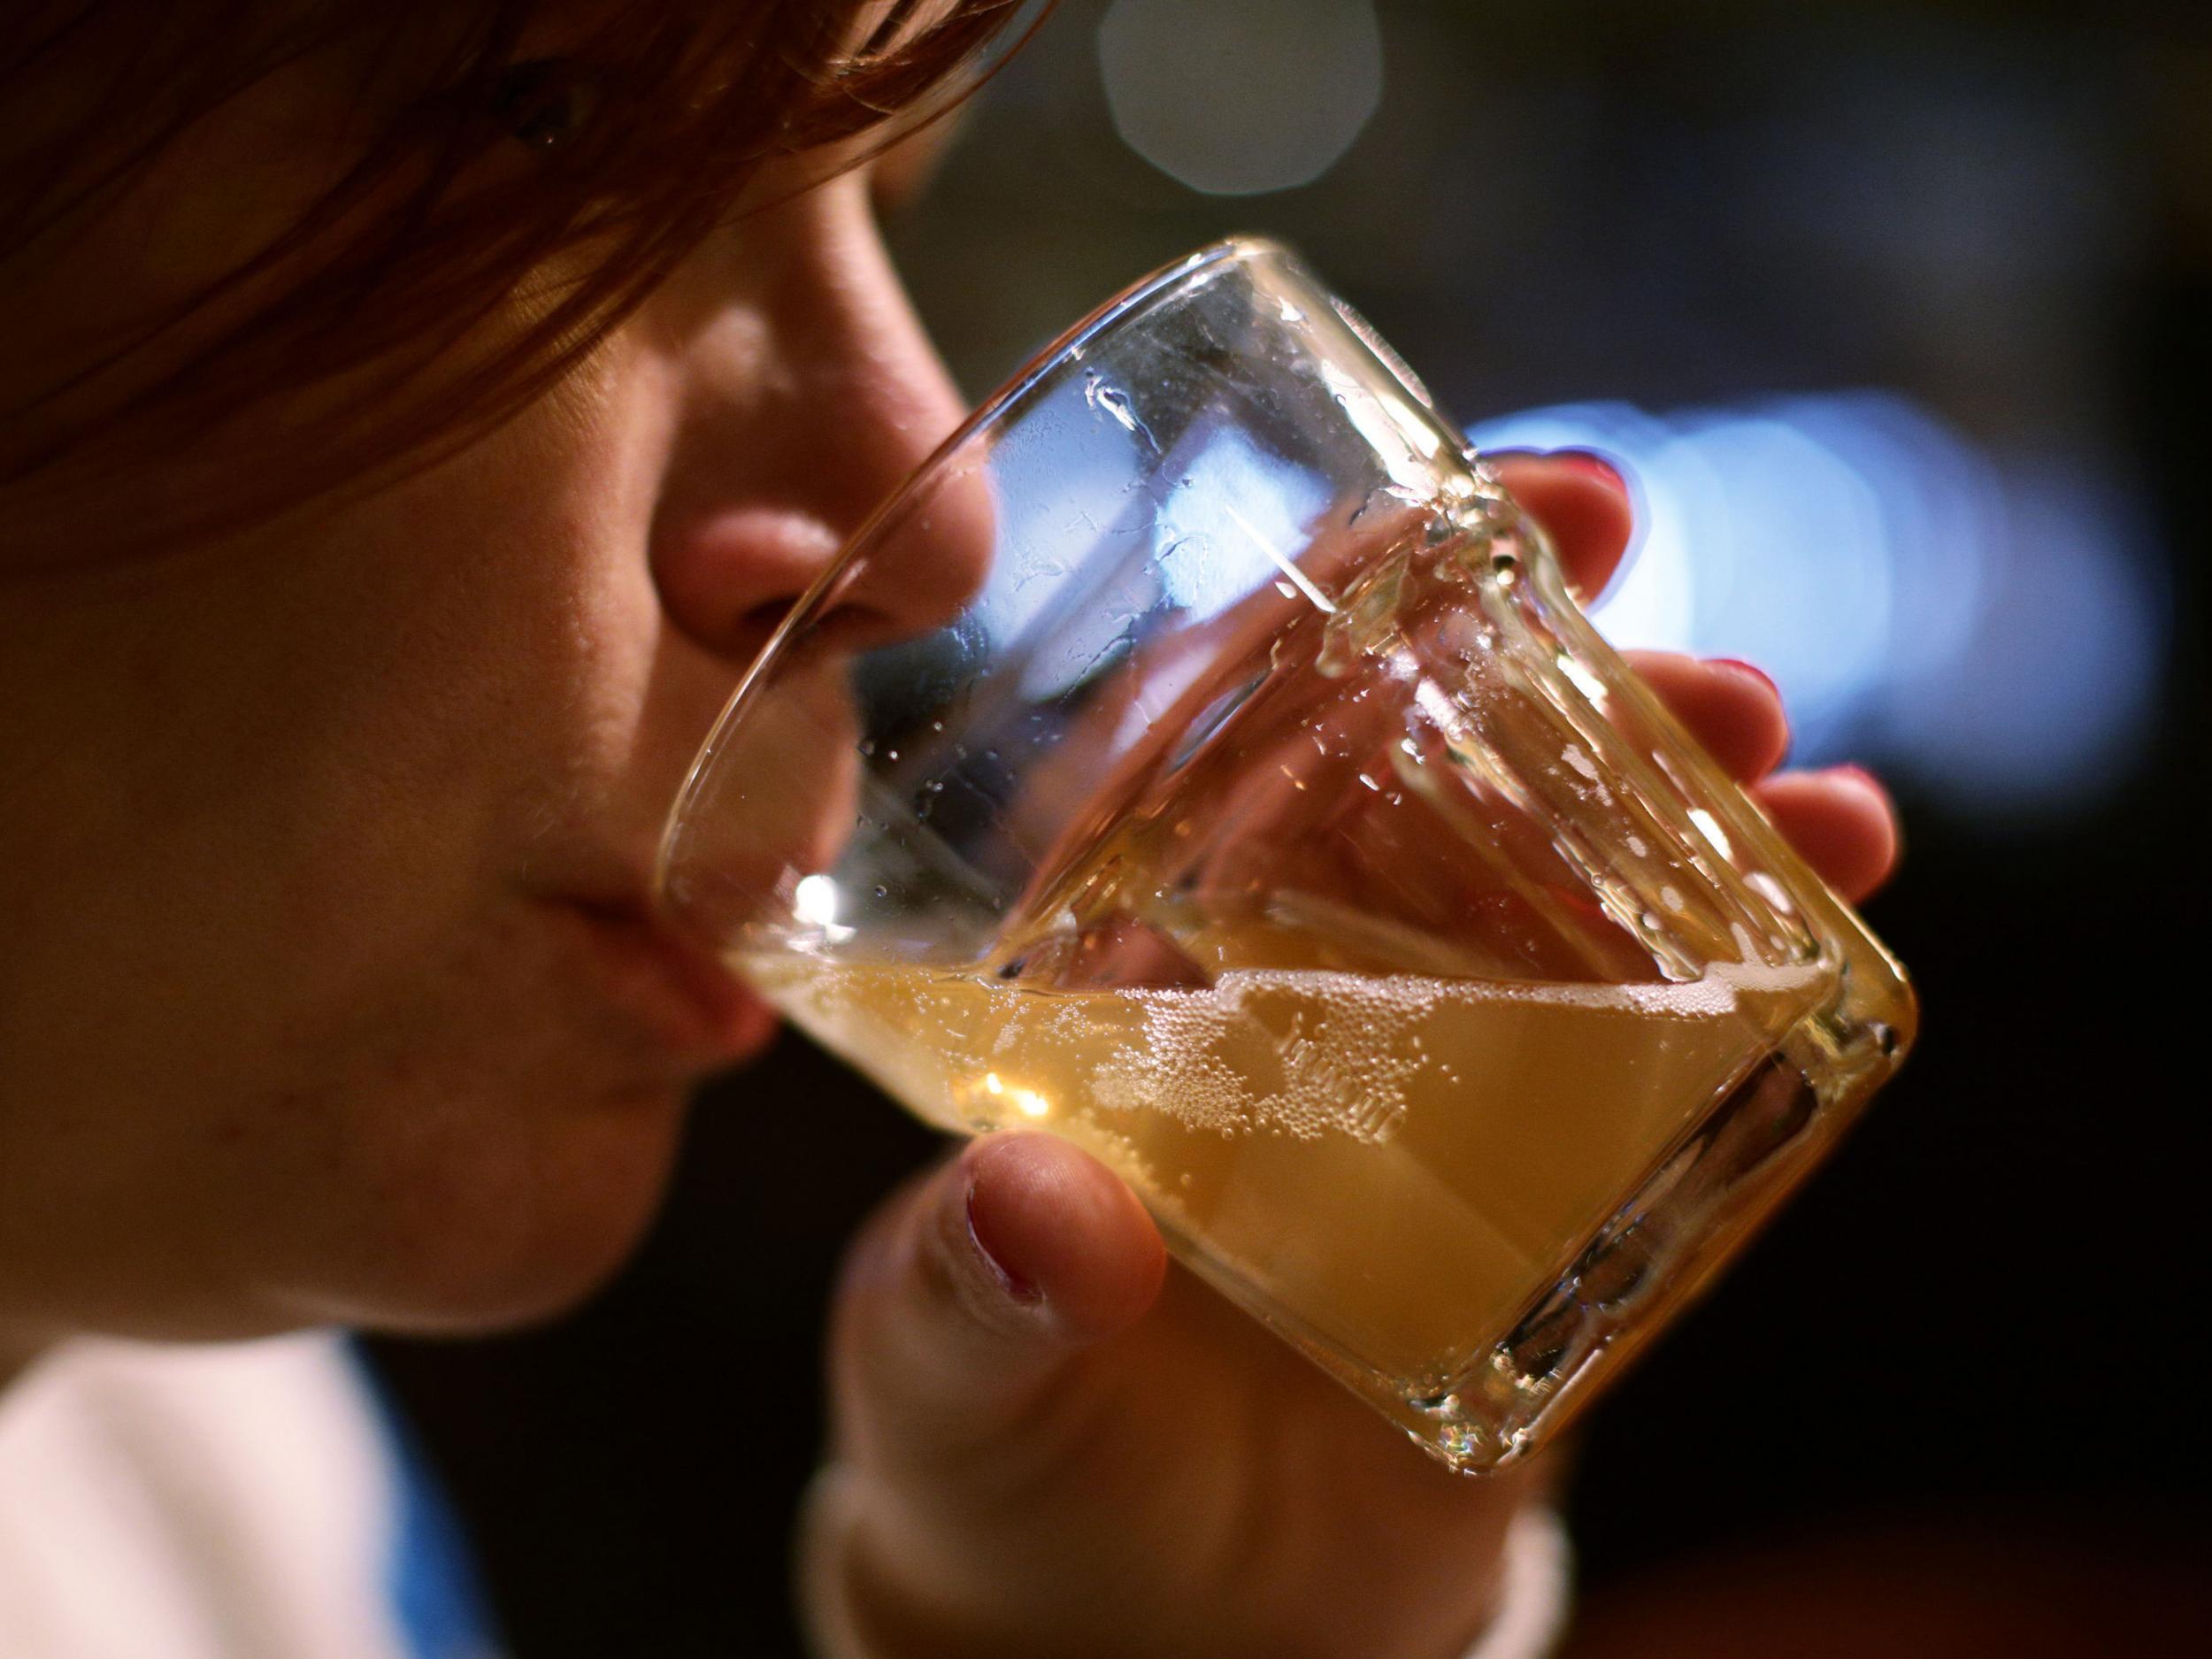 Partners suggesting one more drink makes it harder to cut down, according to new research